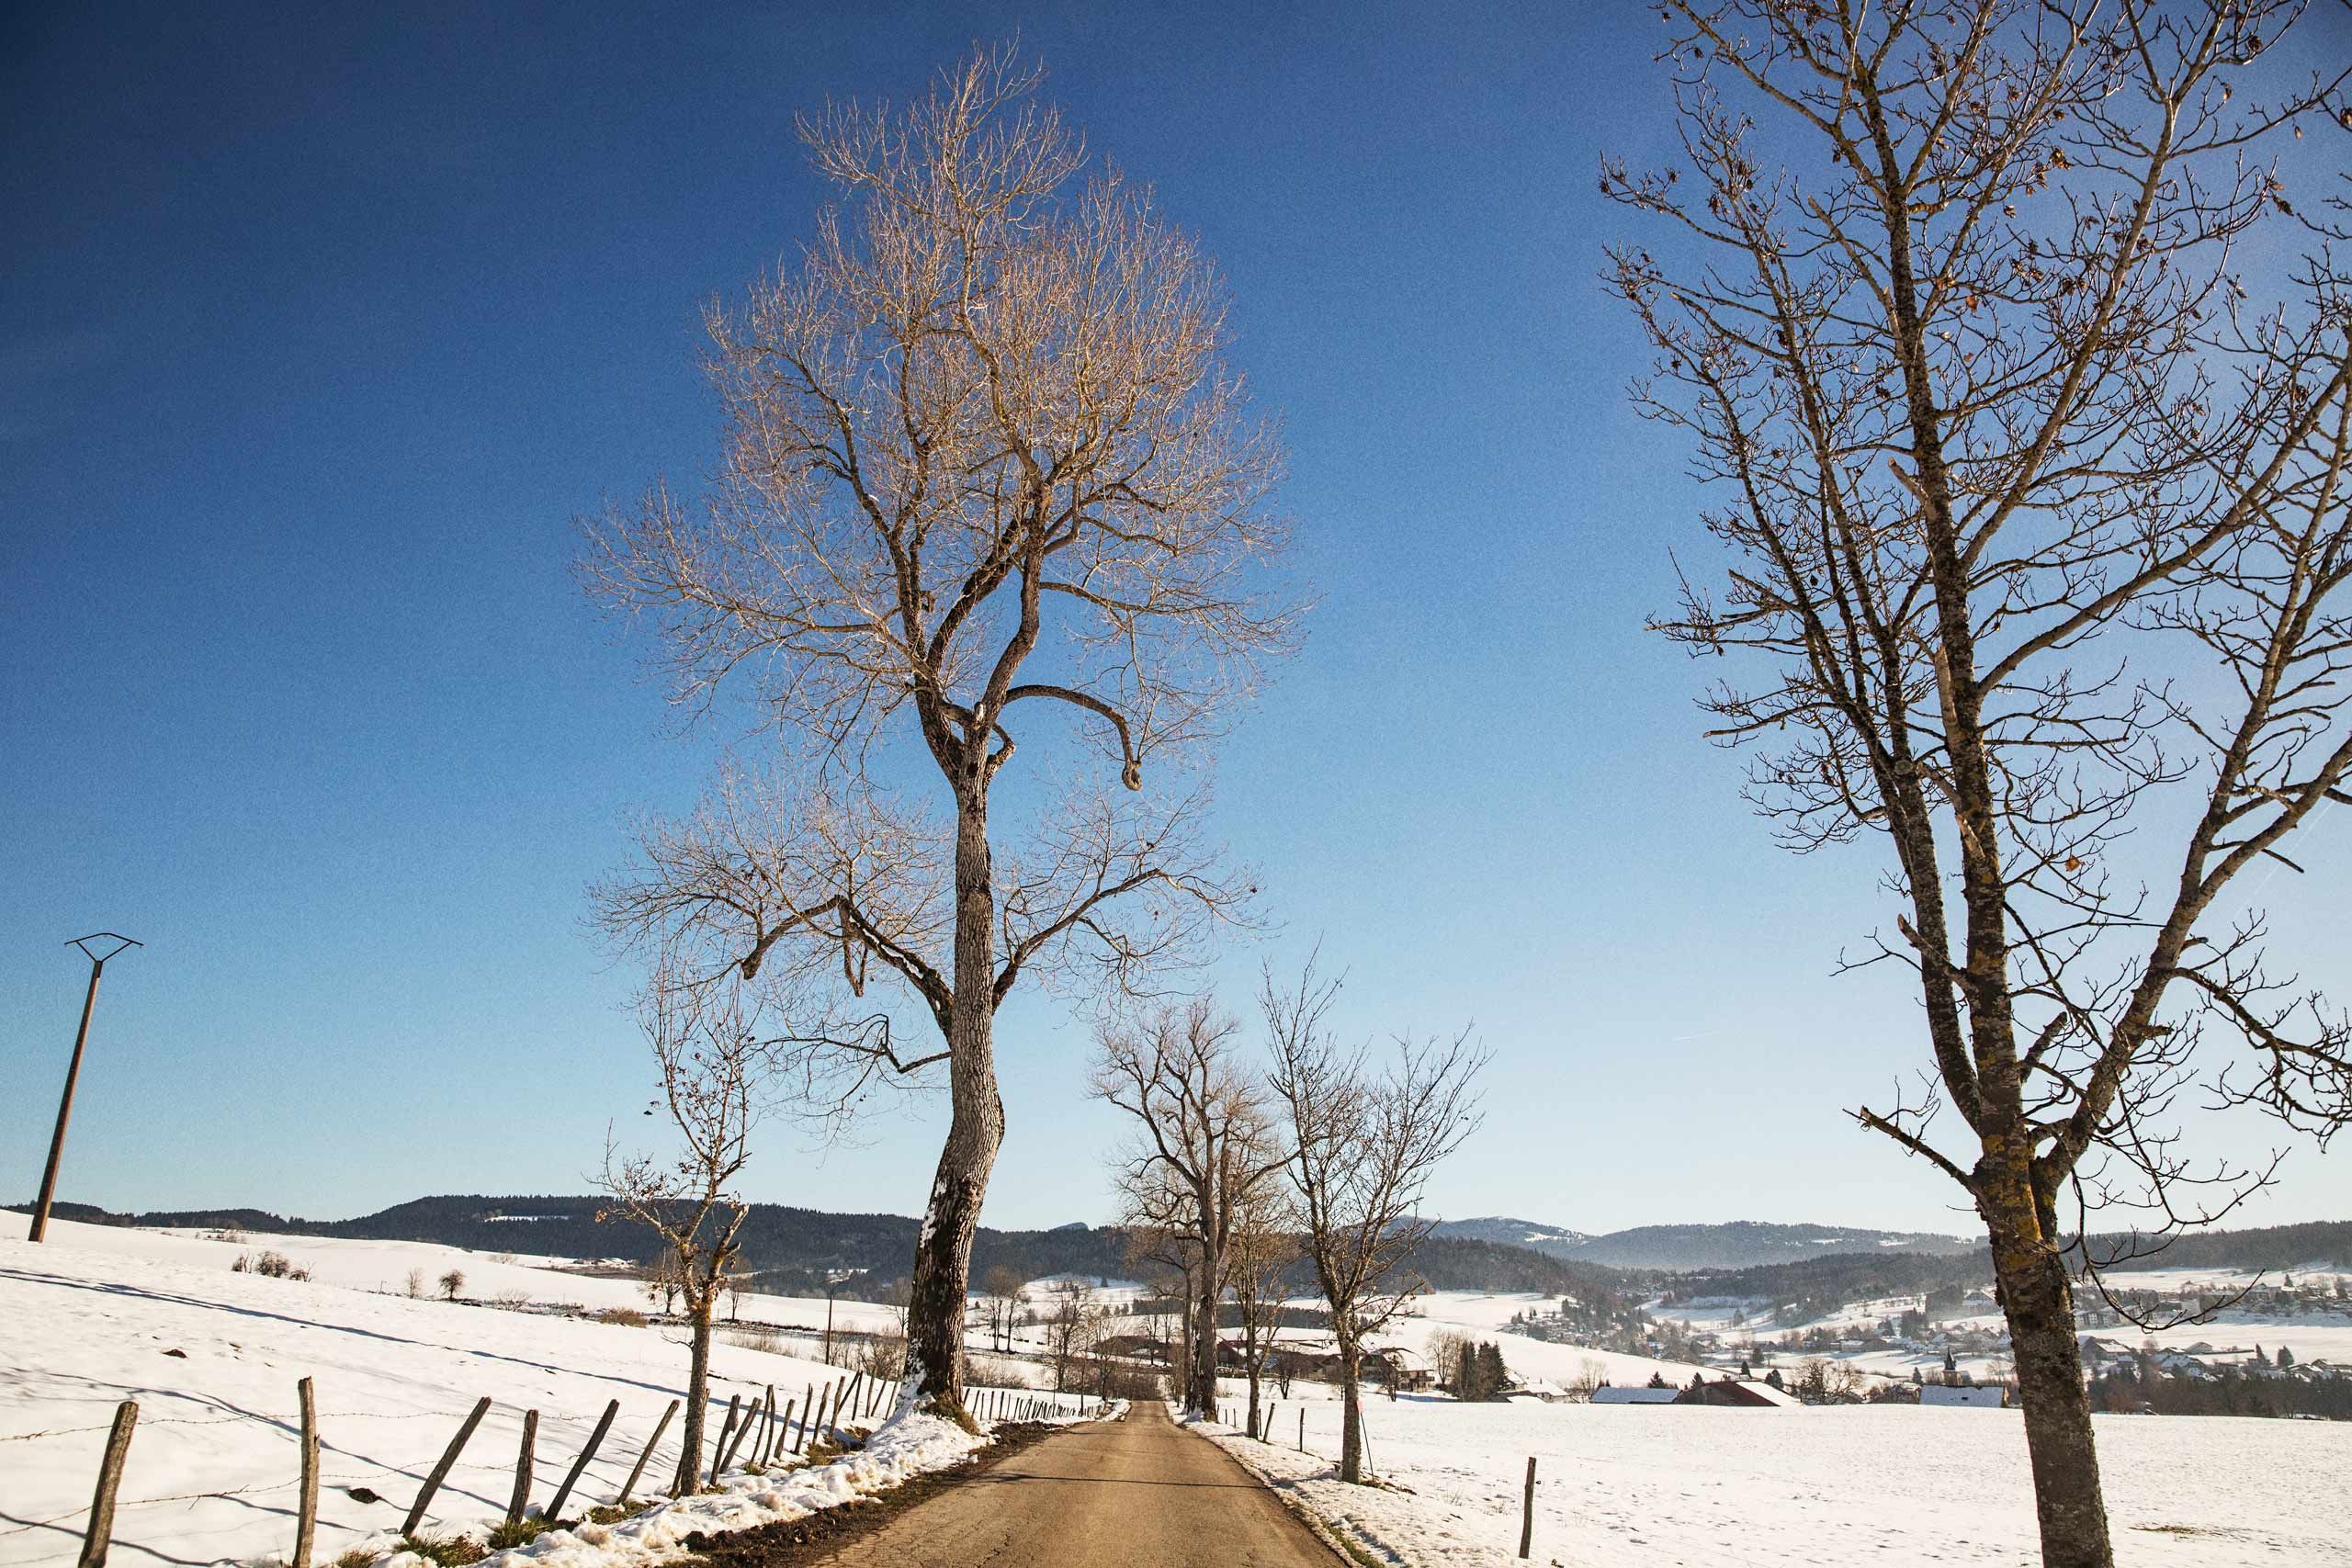 A Leafless Tree Along Side of Road